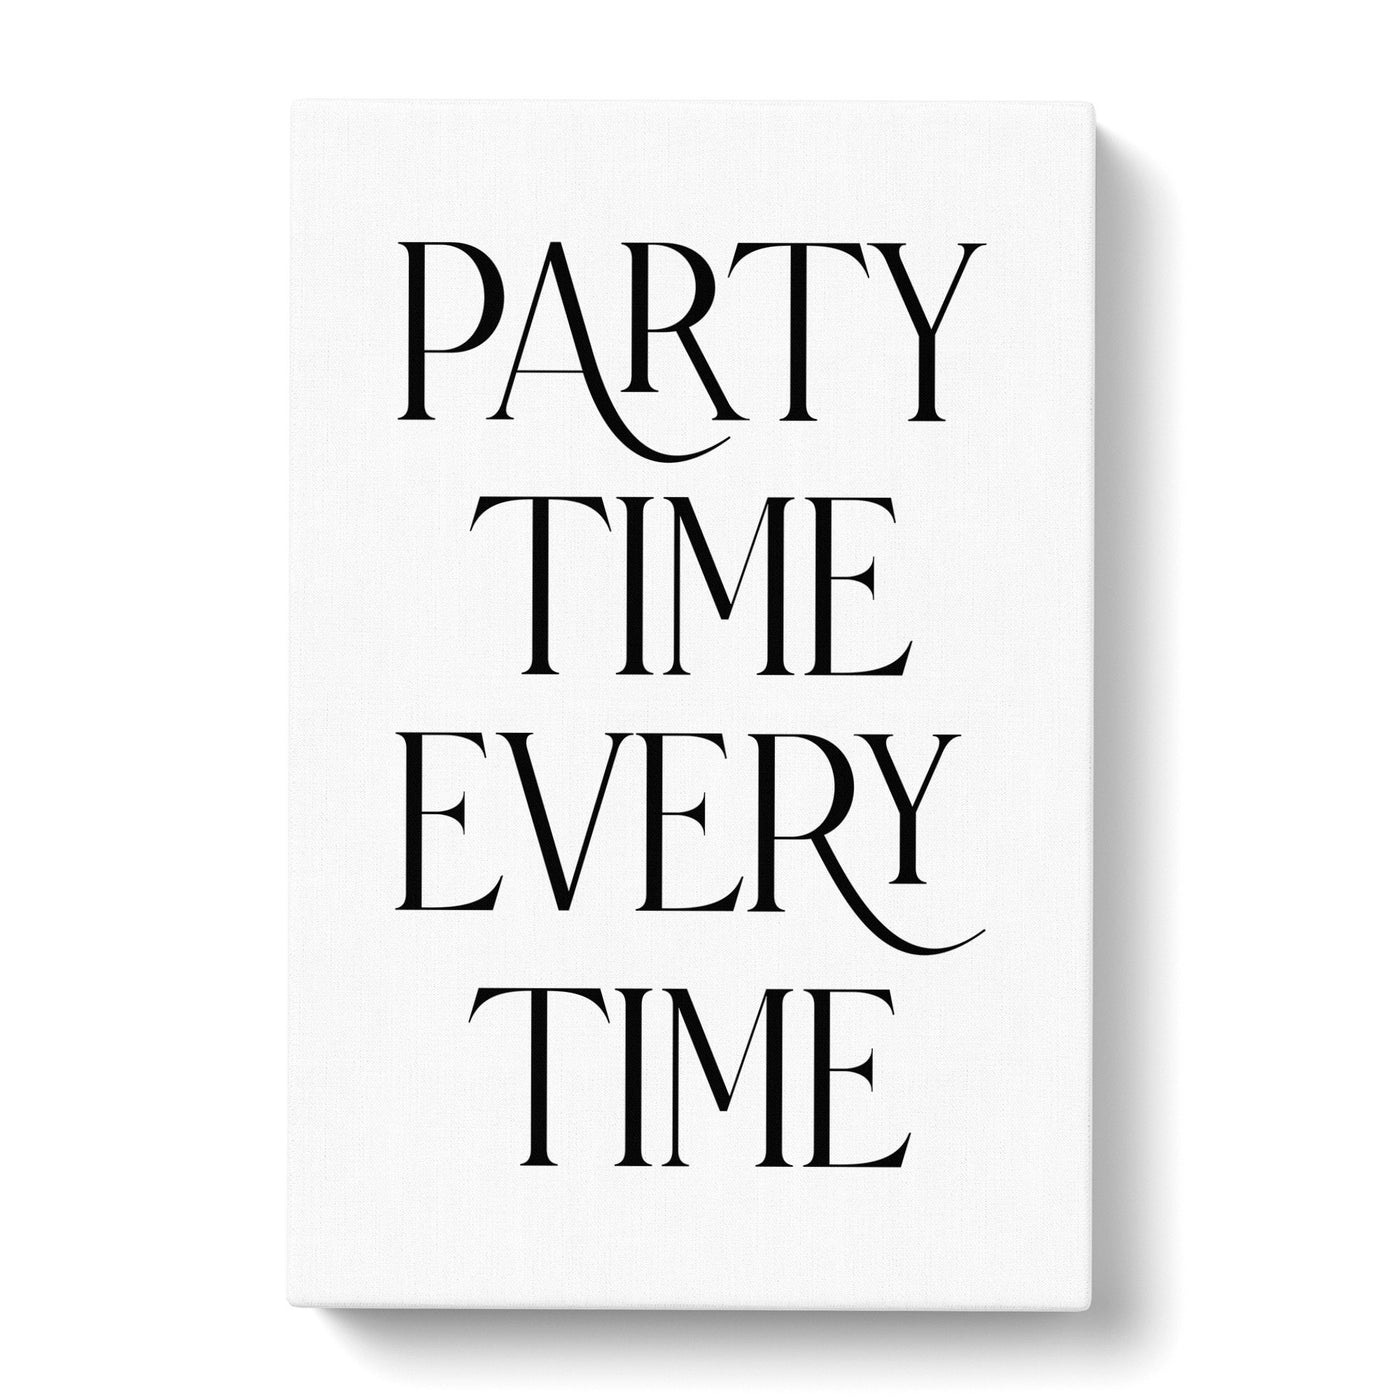 Party Time Every Time Typography Canvas Print Main Image